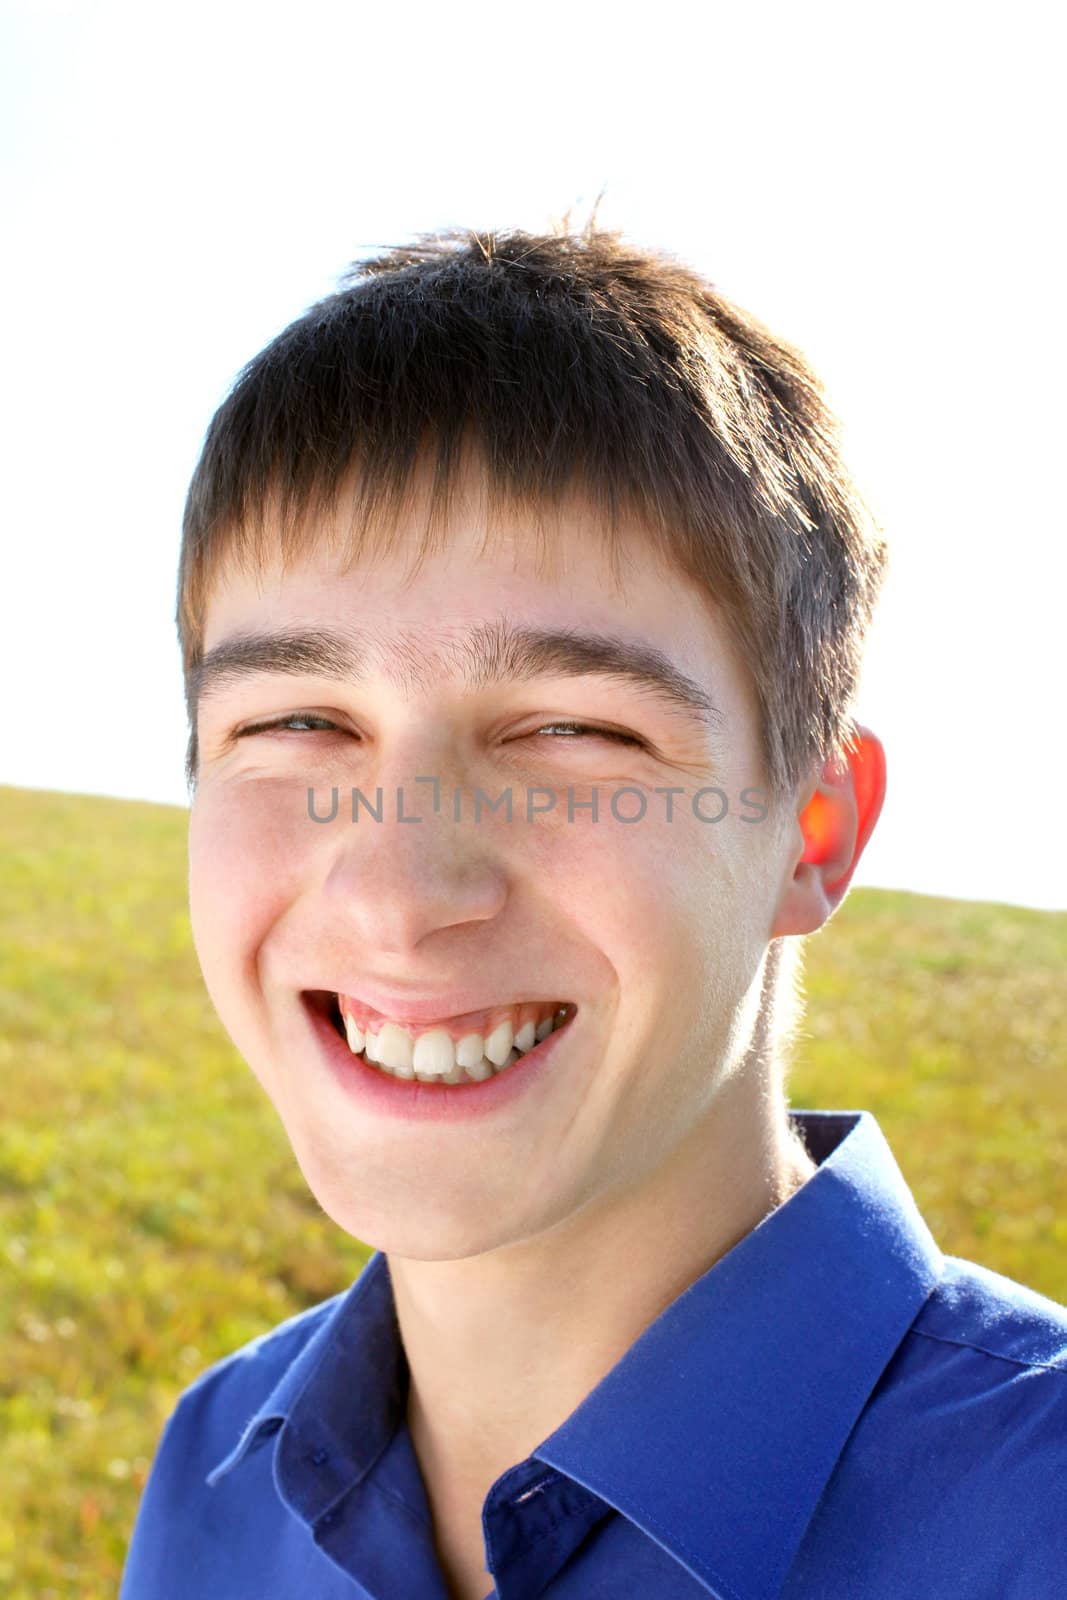 happy and smiling teenager portrait outdoor